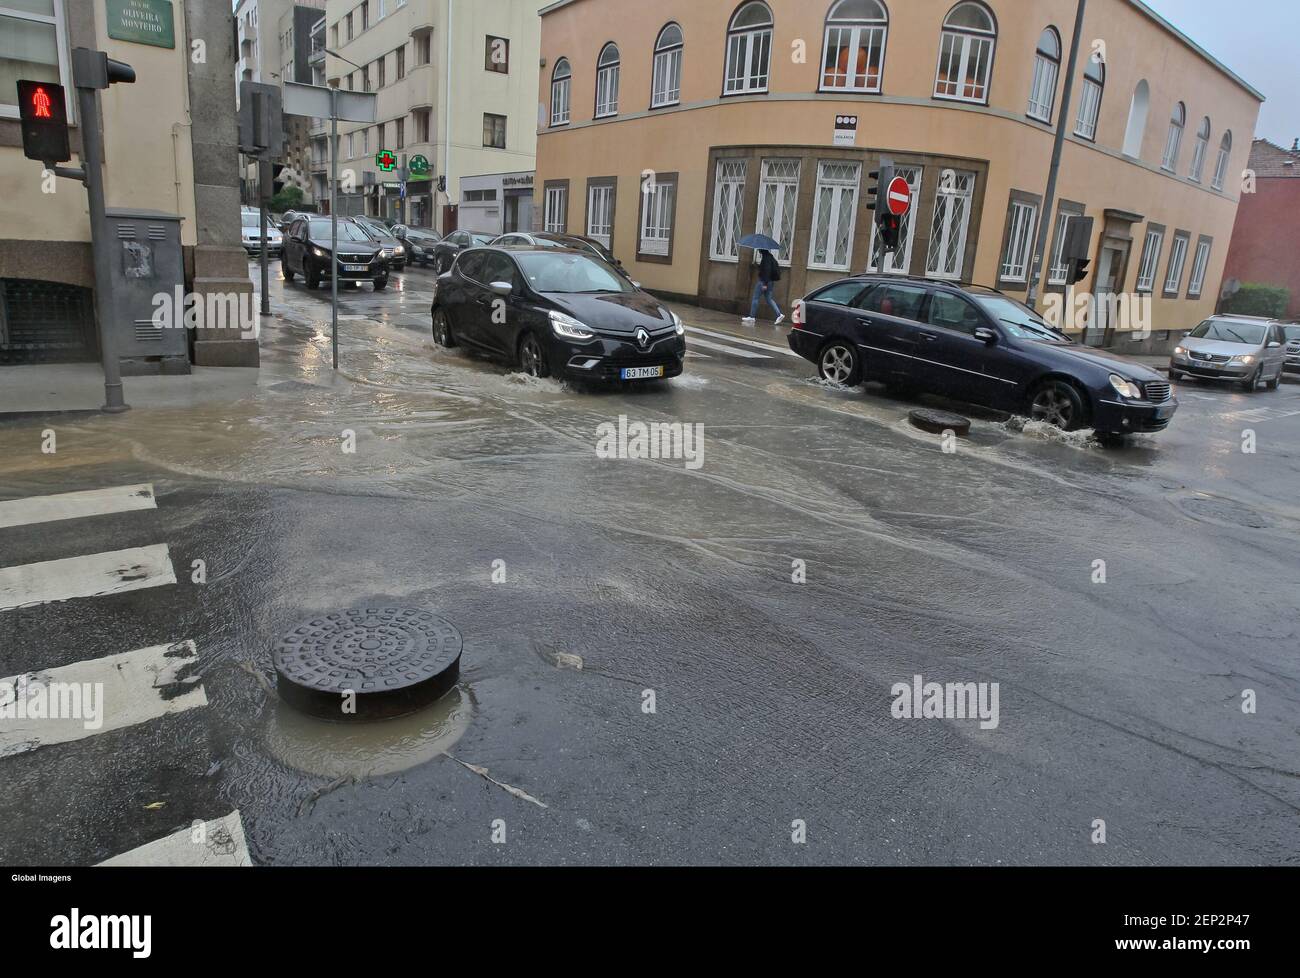 Porto, 10/19/2019 - Bad weather and heavy rain in the city of Porto caused  many flooded streets. Flooded streets at the intersection of Rua de Oliveira  Monteiro with Rua da Boavista, where